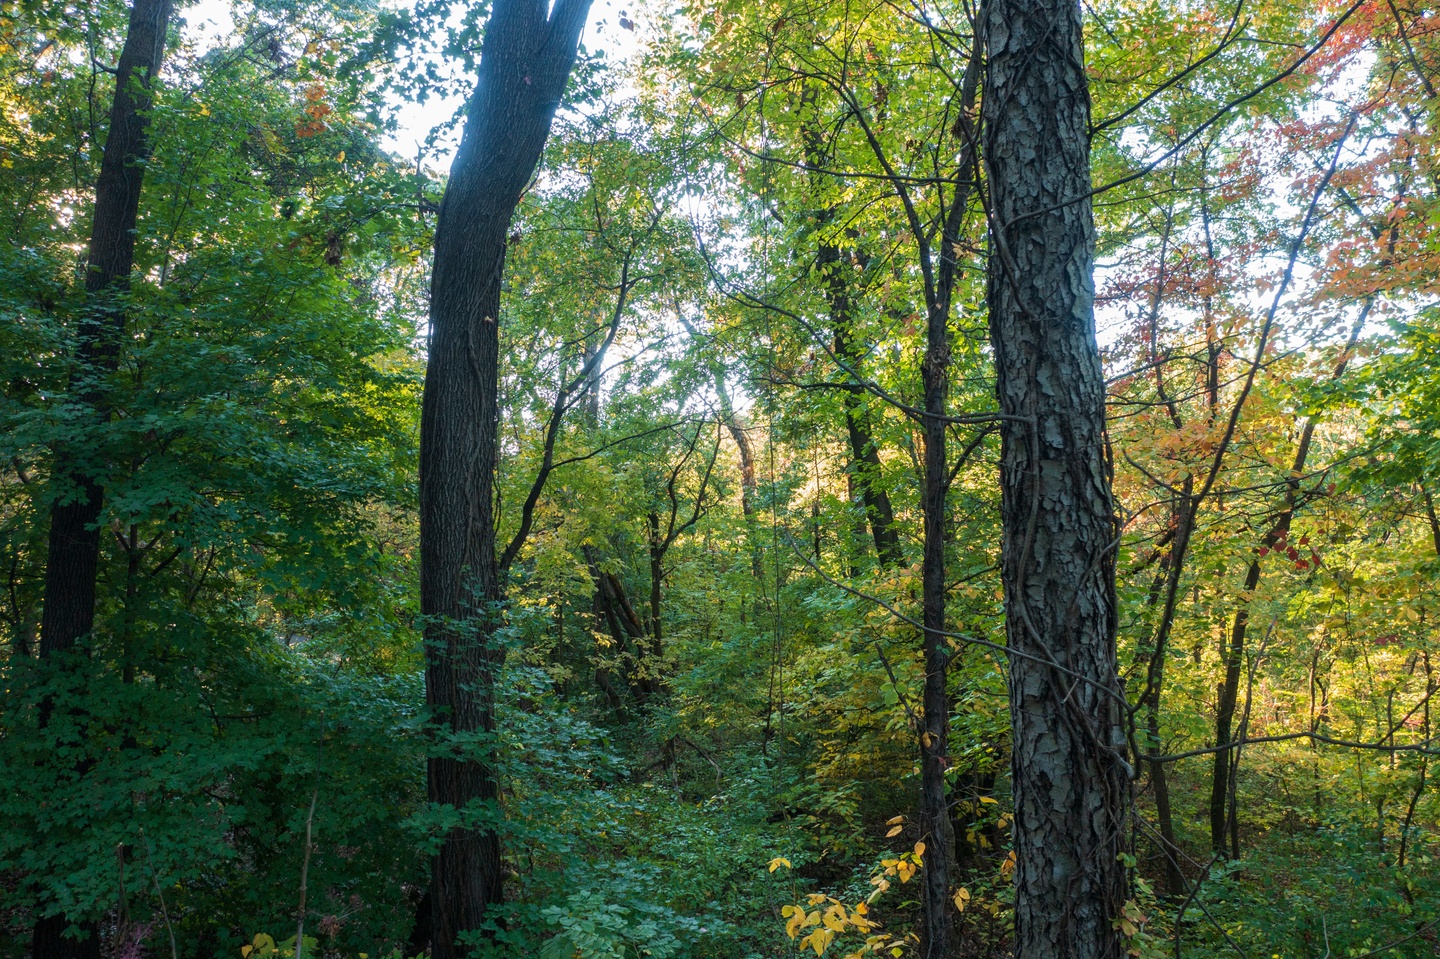 Photograph of a densely wooded area, with lots of tree trunks and green and yellow leaves.